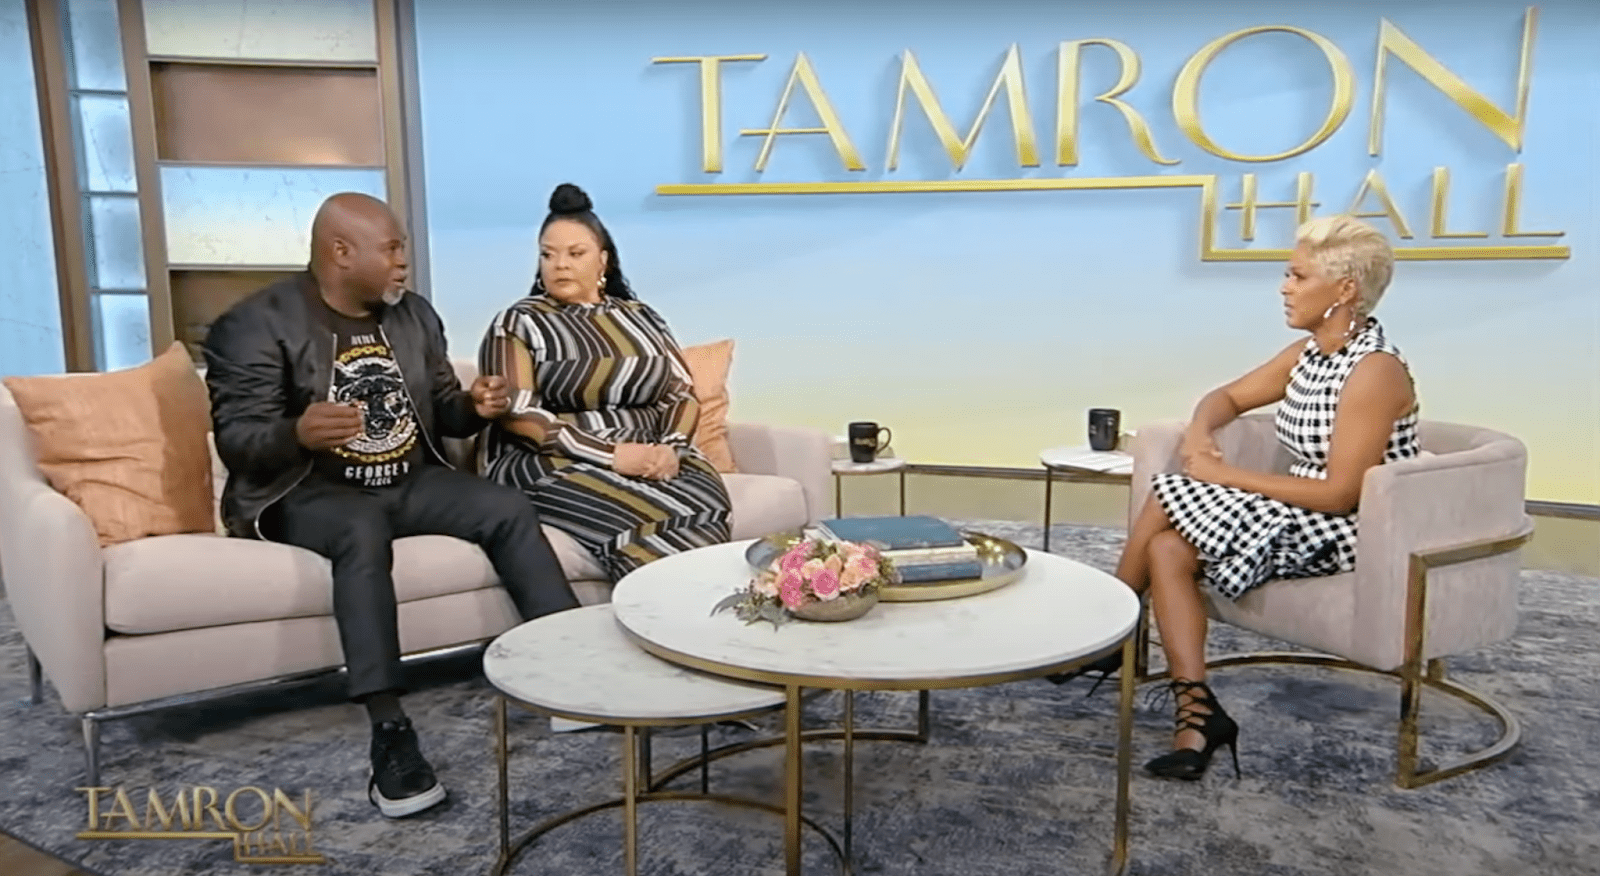 David Mann Talks About His Struggle With Depression on Today’s “Tamron Hall”